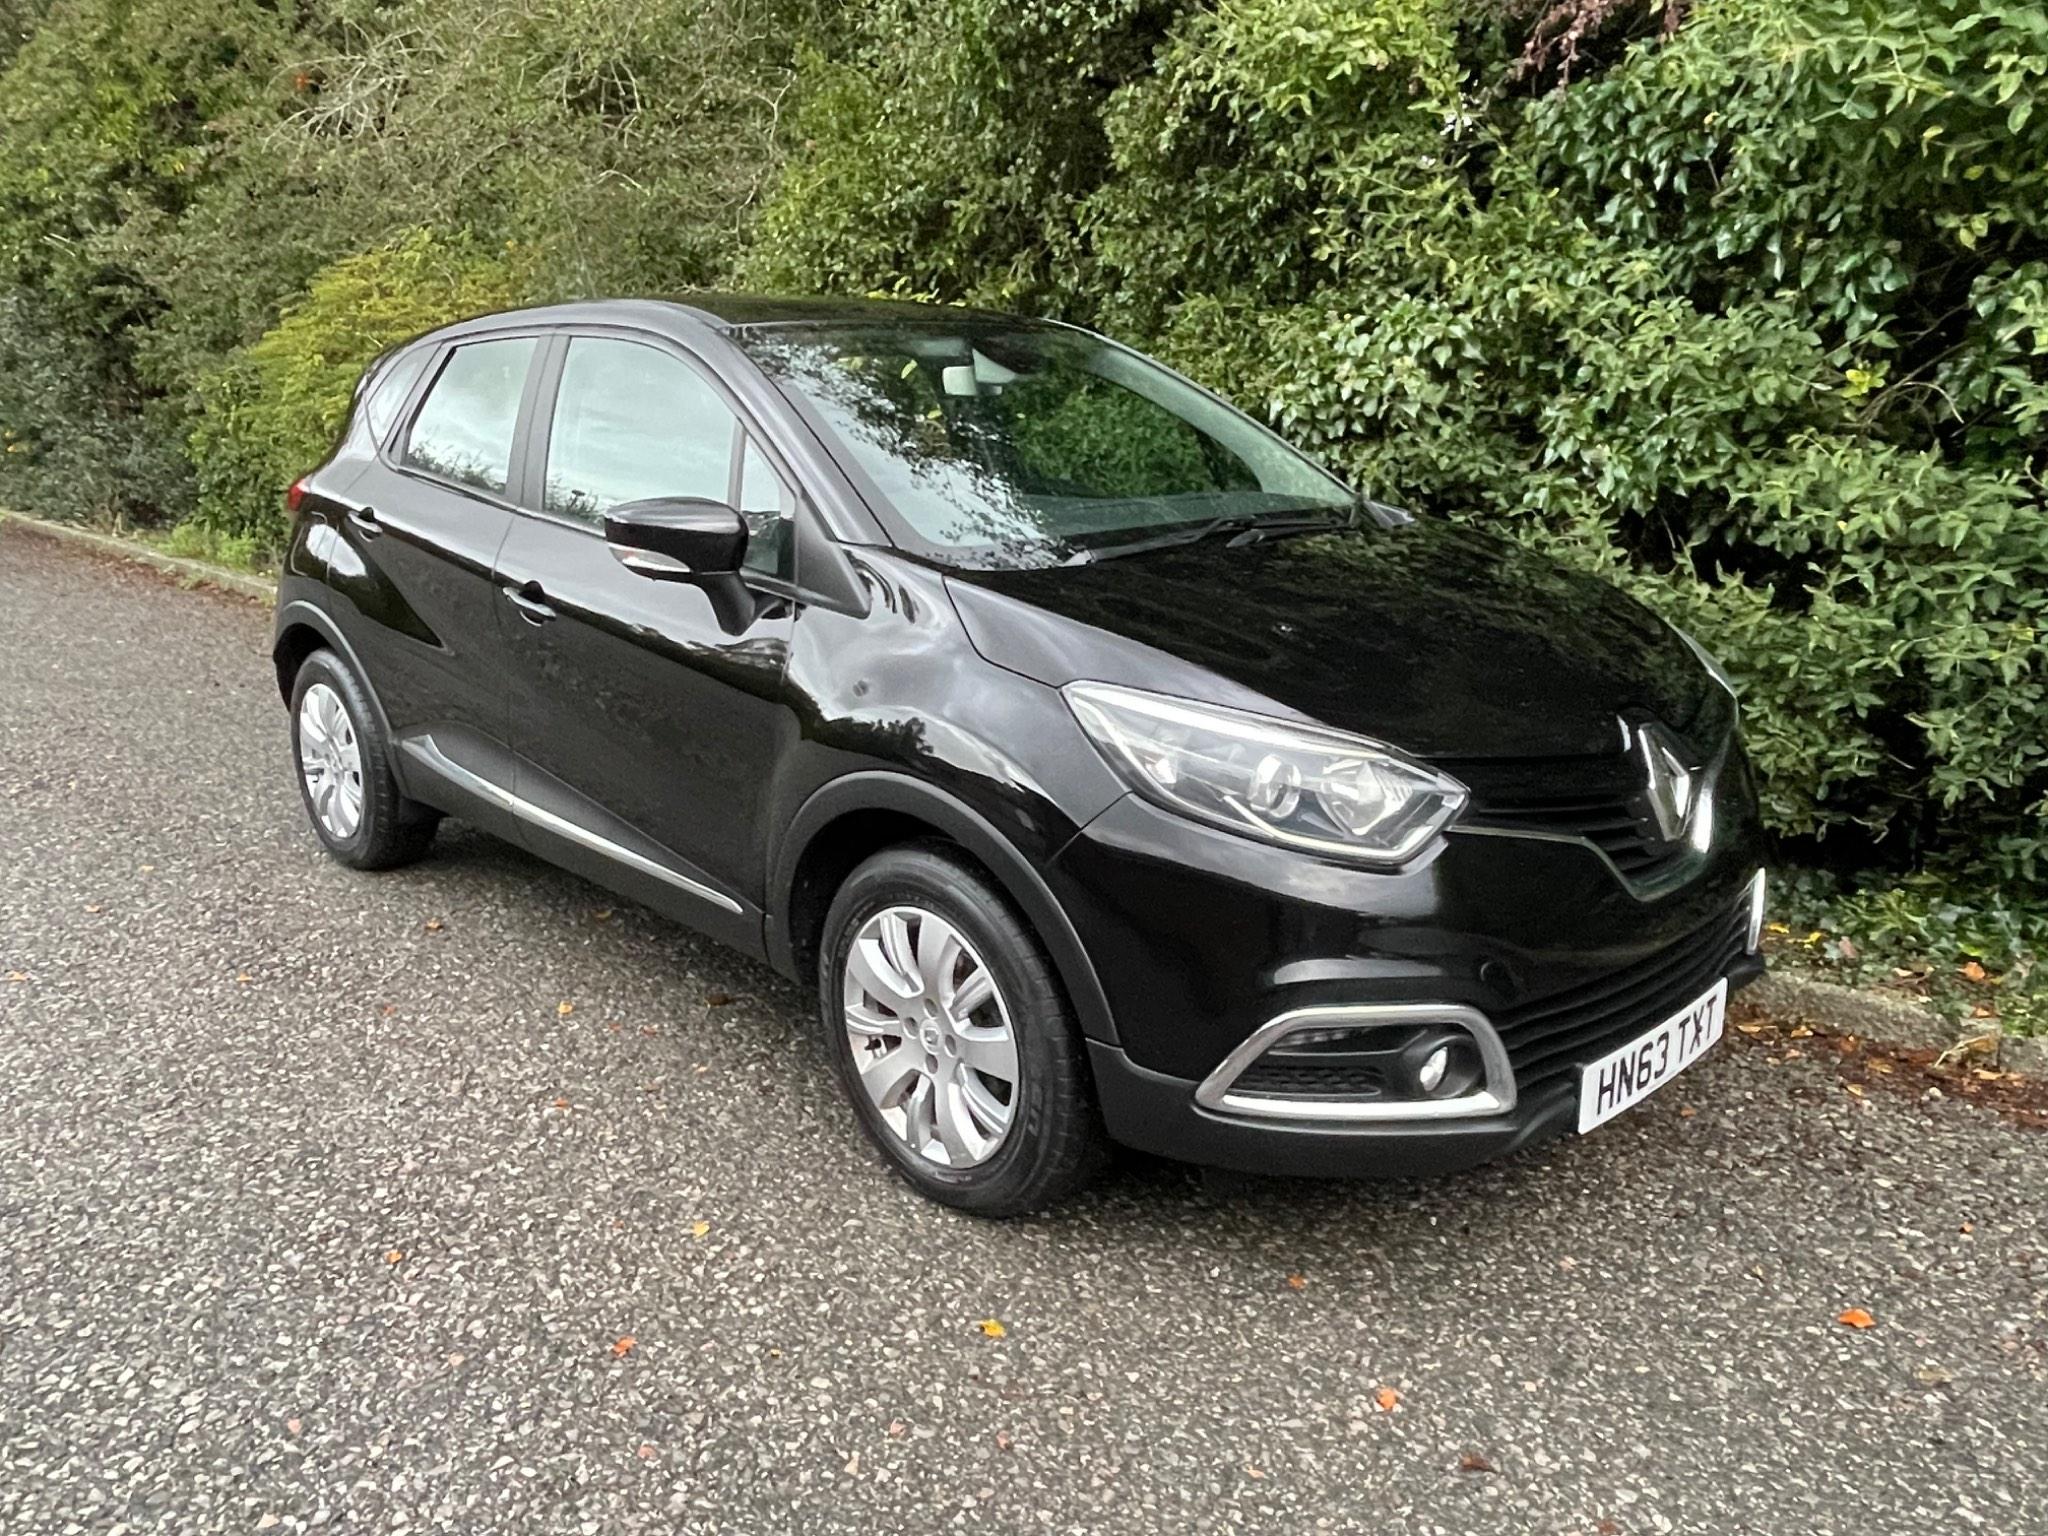 Used Renault Captur Review - 2013-2019